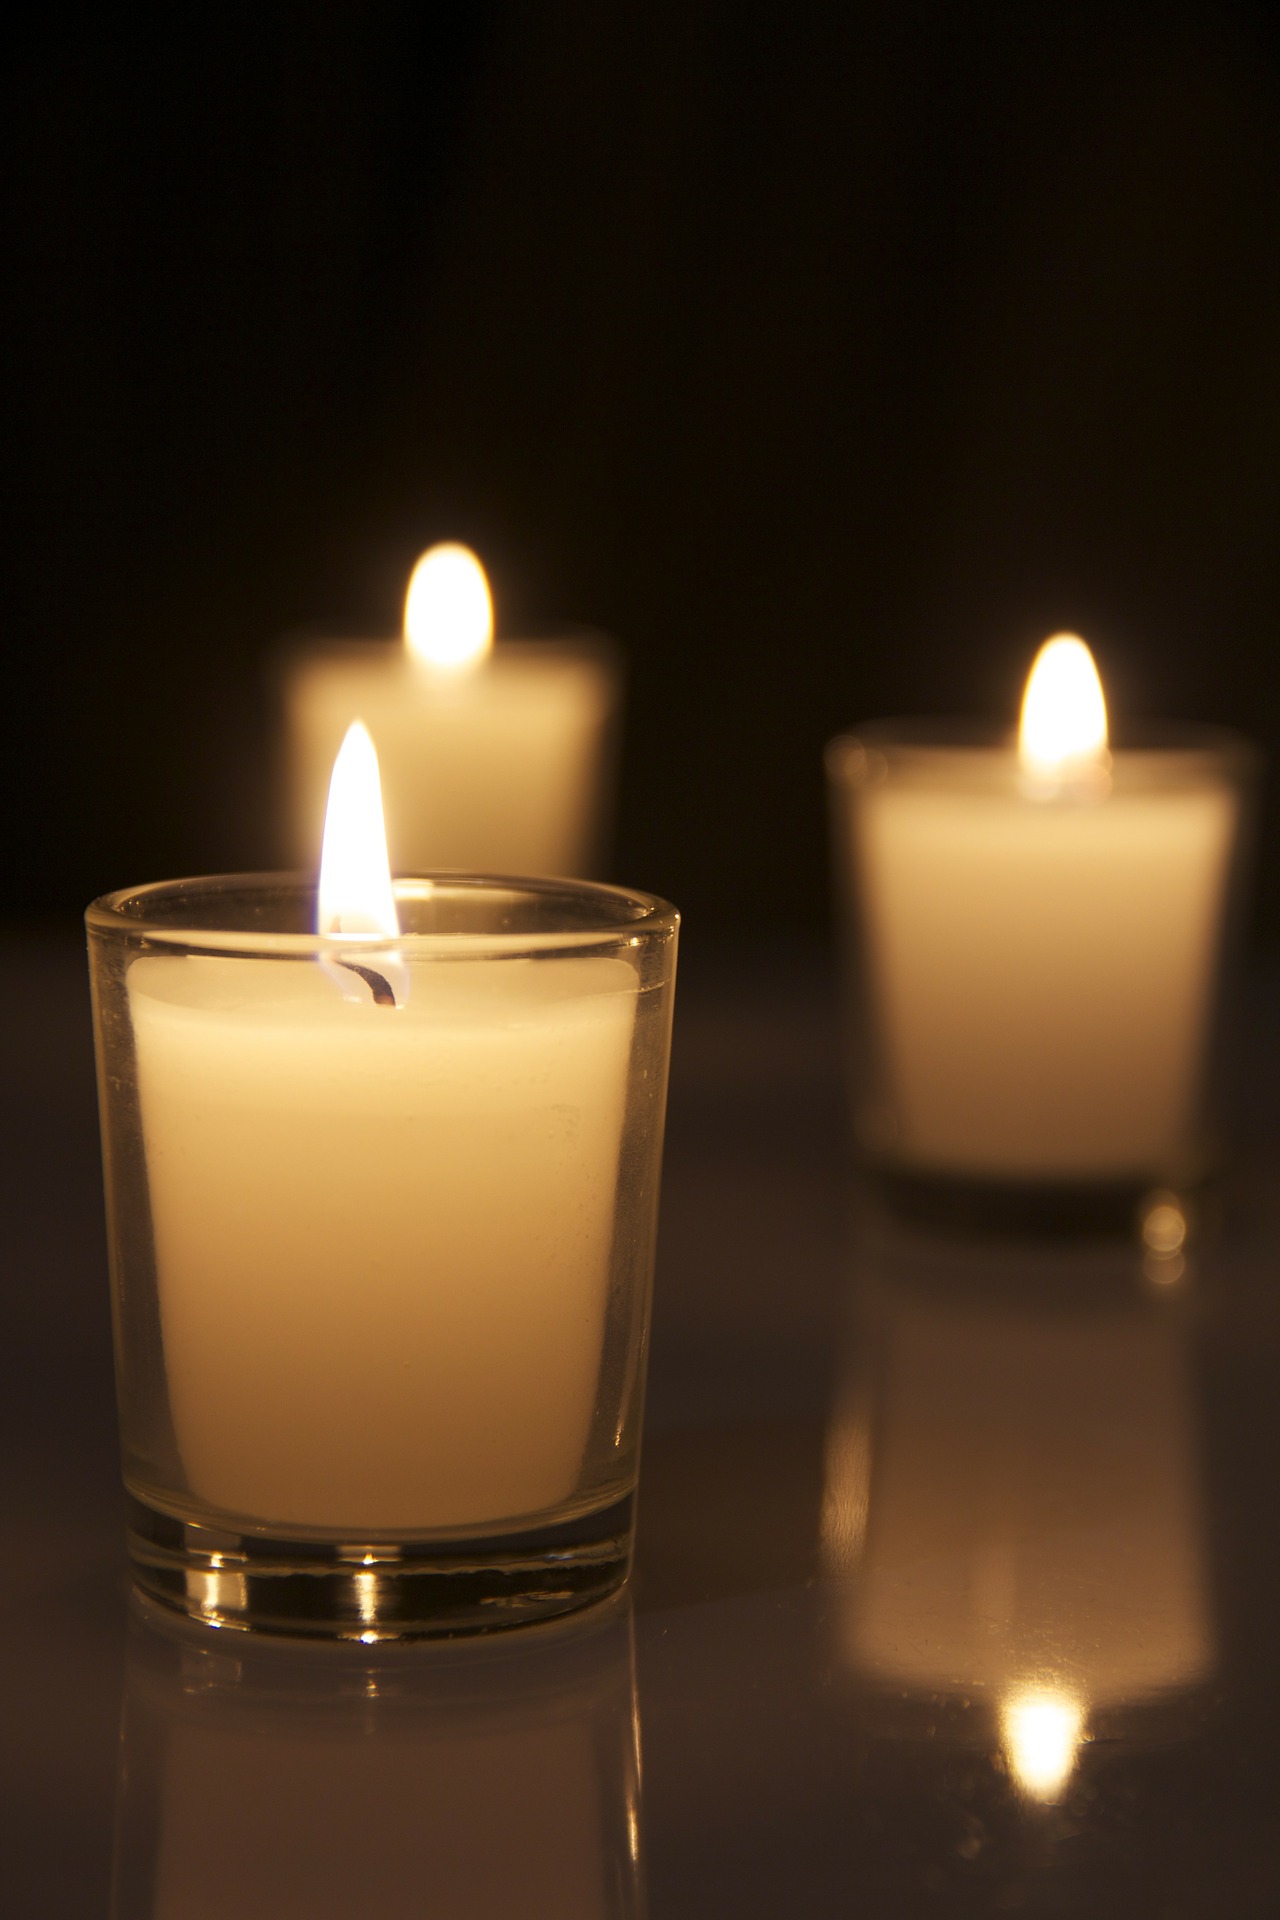 Yankee Candle Tips – What To Do When The Wick Runs Out